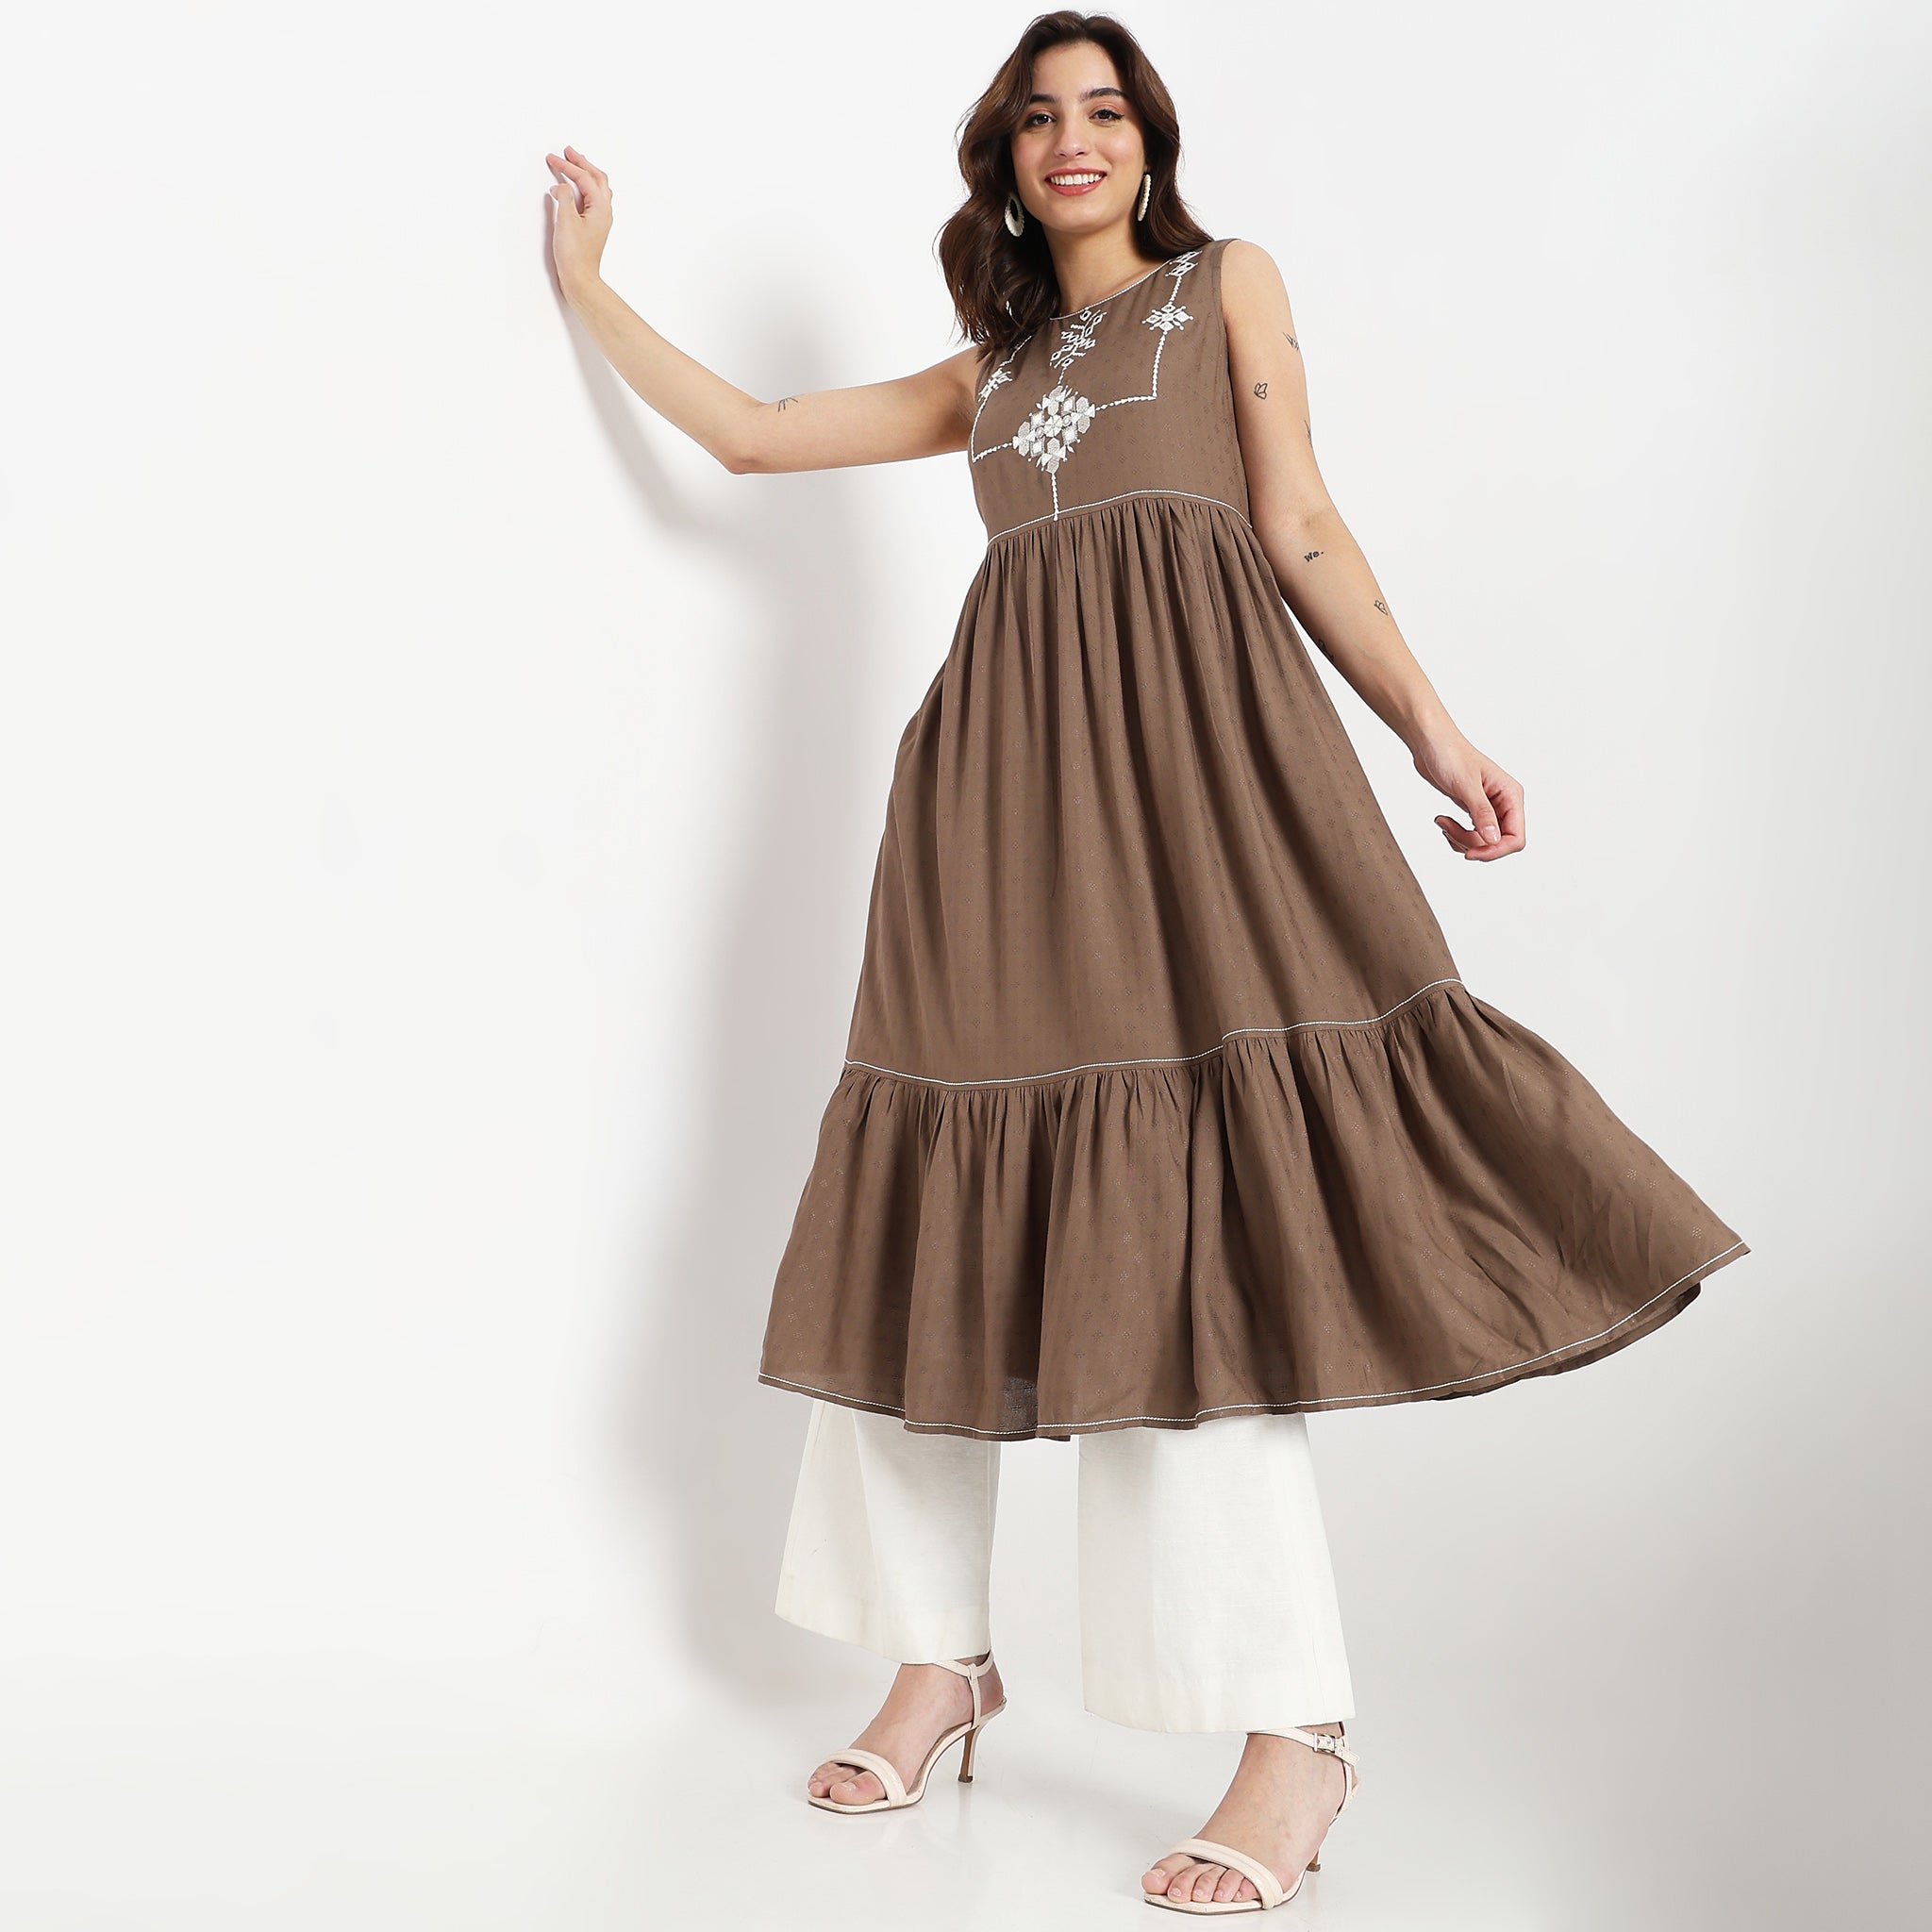 Indian Clothes - Shop Indian Clothes in Australia with Free Shipping